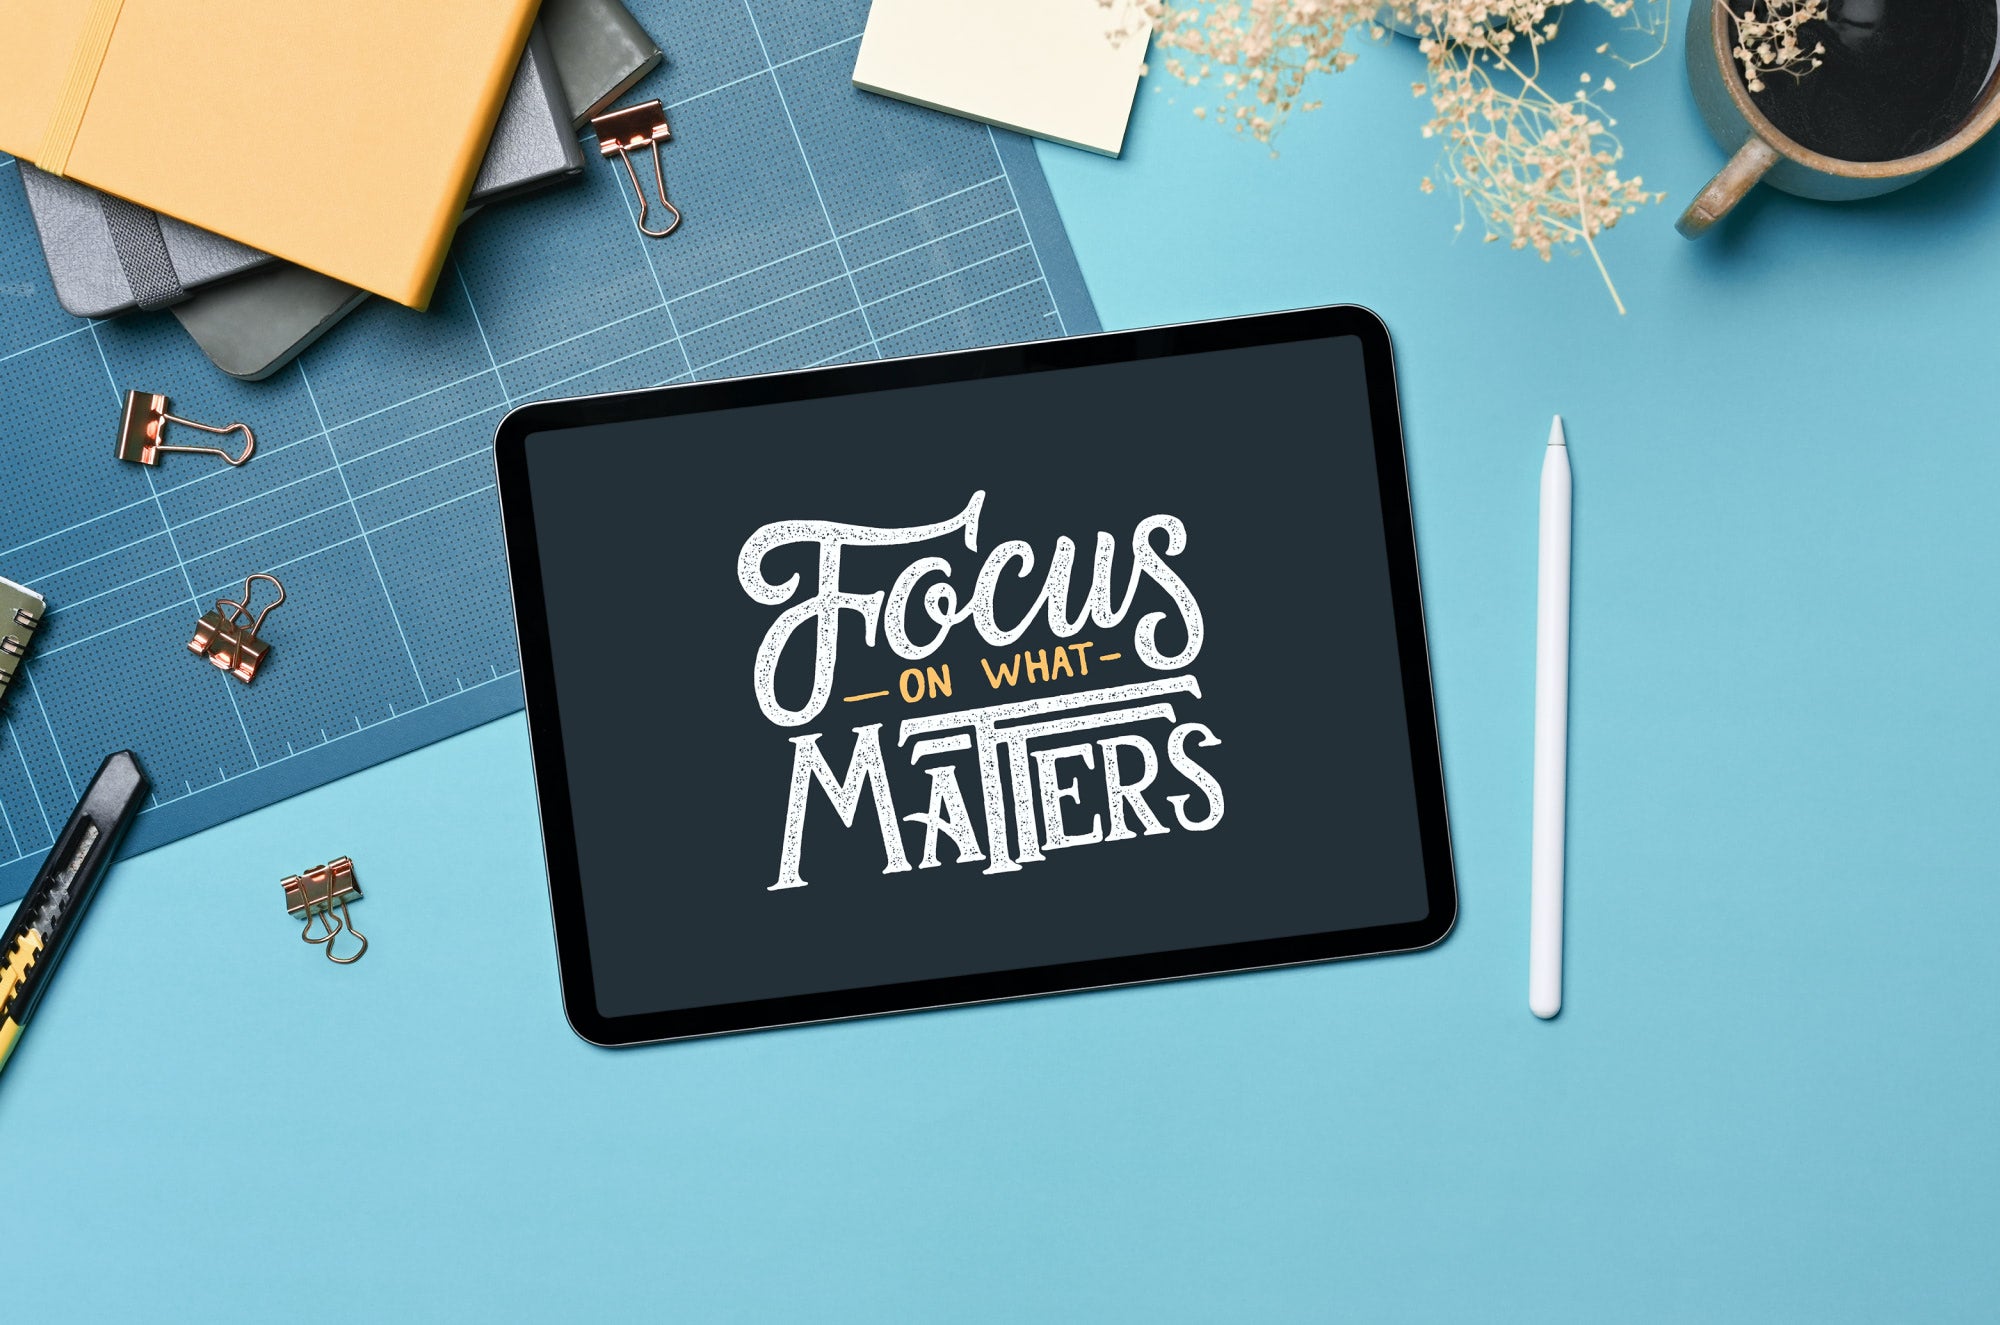 An image of an iPad surrounded by stationery supplies and an Apple Pencil with lettering that says, "Focus on what matters".